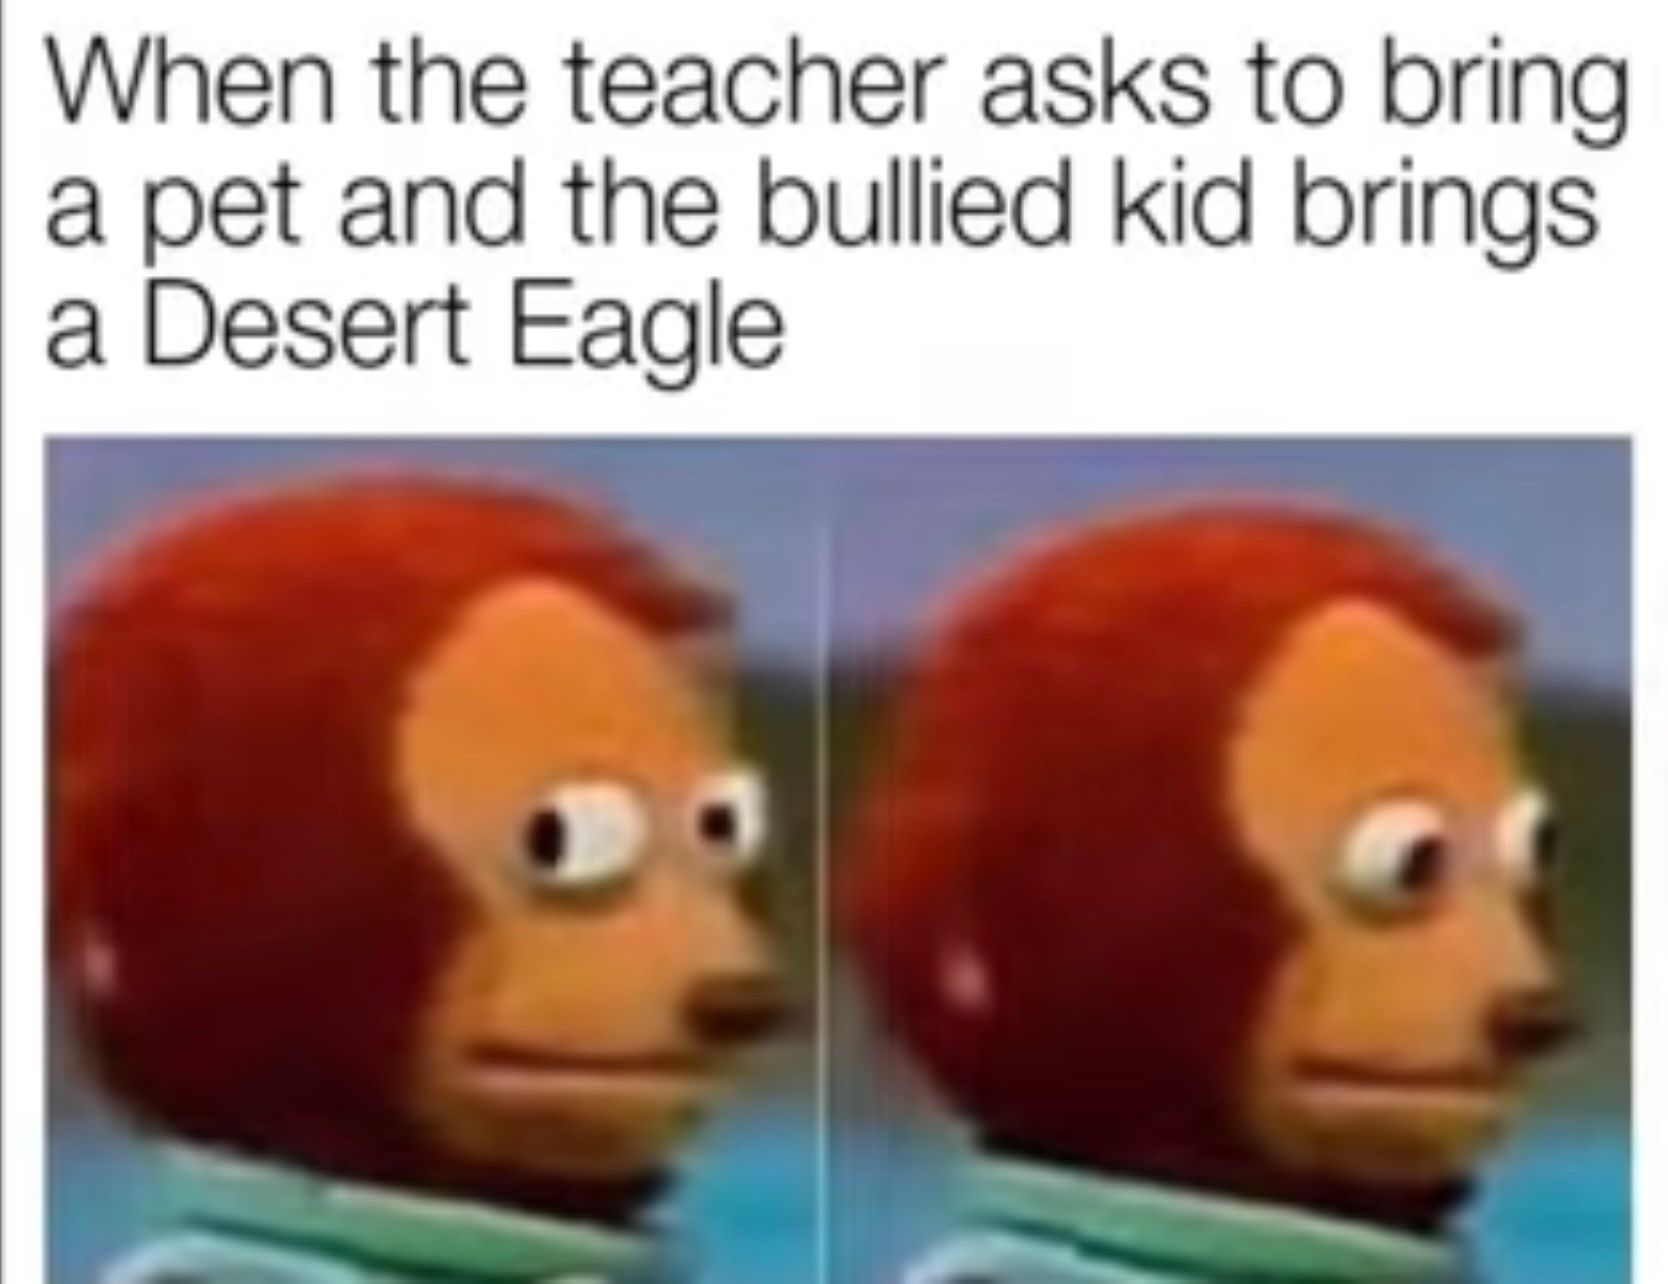 When the teacher asks to bring
a pet and the bullied kid brings
a Desert Eagle